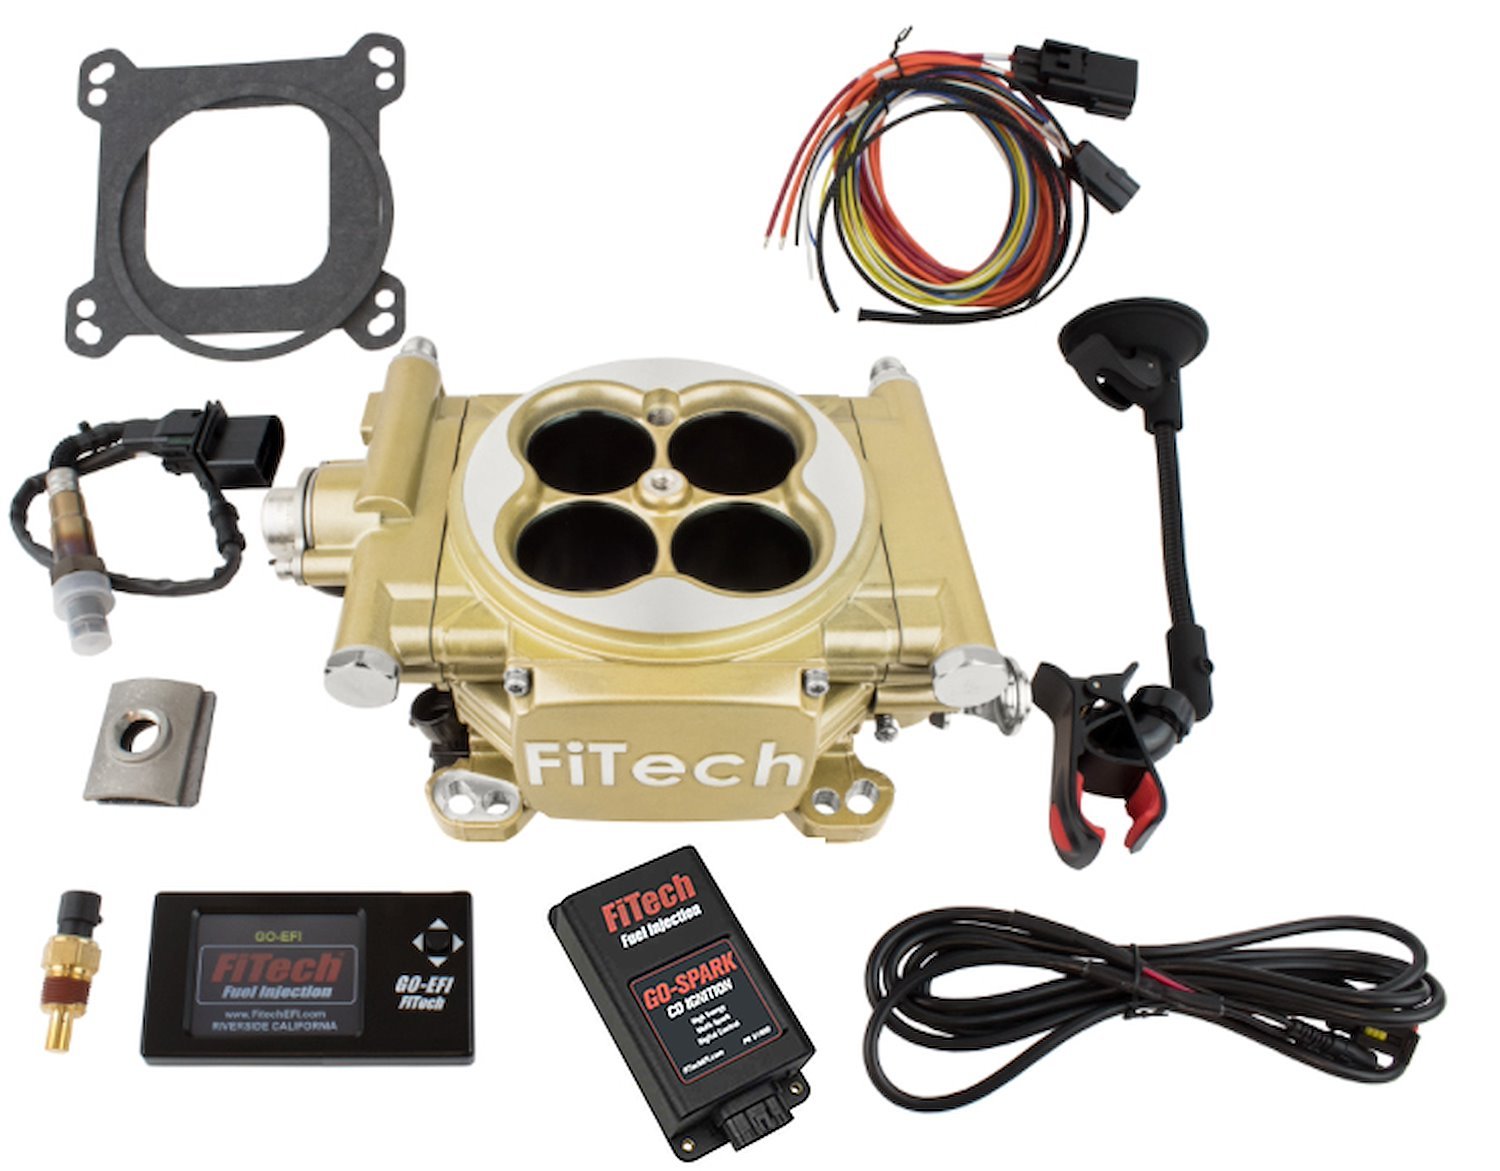 Easy Street EFI 600 HP Throttle Body Fuel Injection Master Kit [with CDI Box] Classic Gold